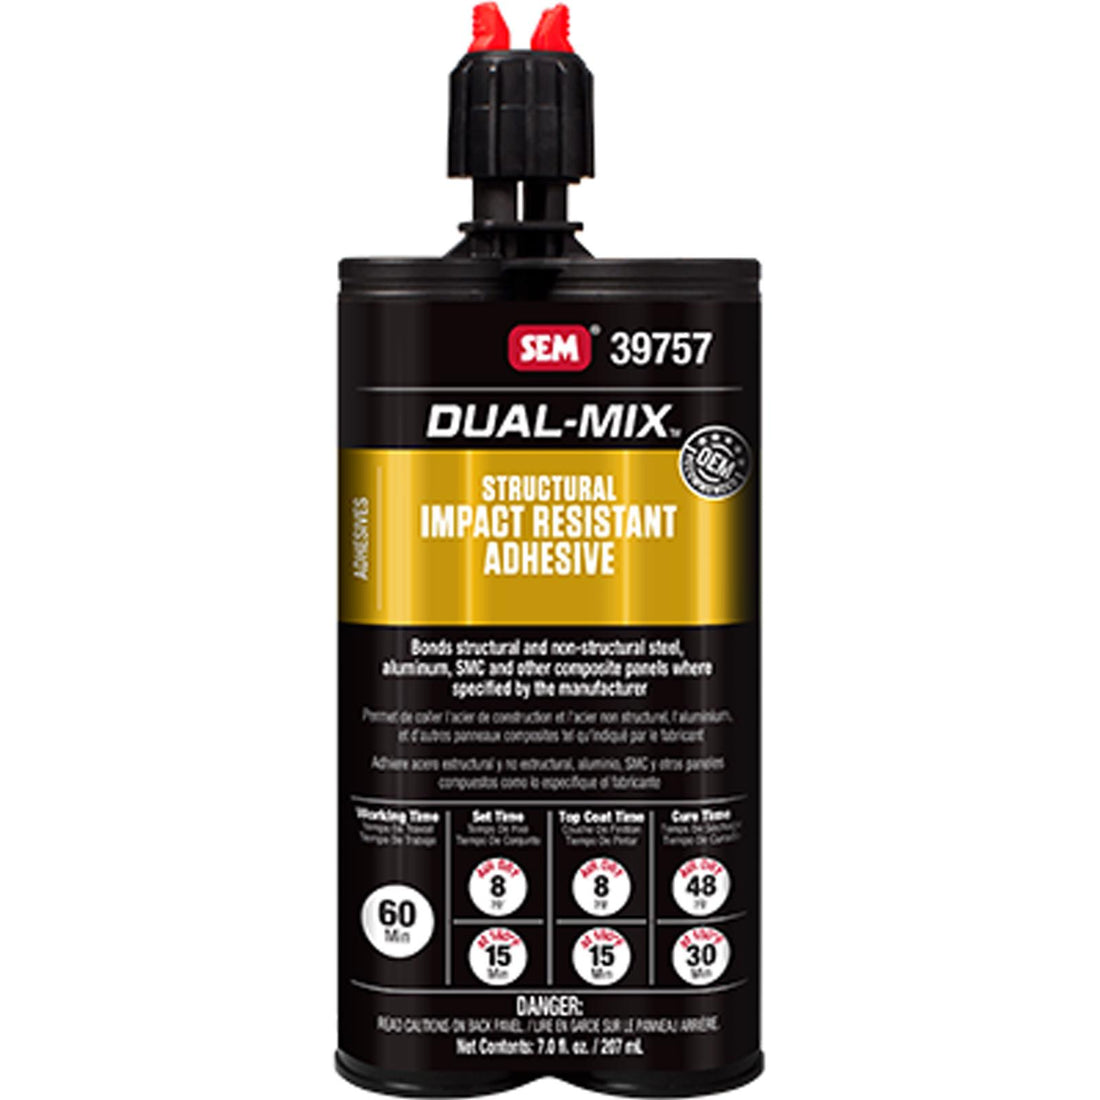 Dual-Mix Structural Impact Resistant Adhesive